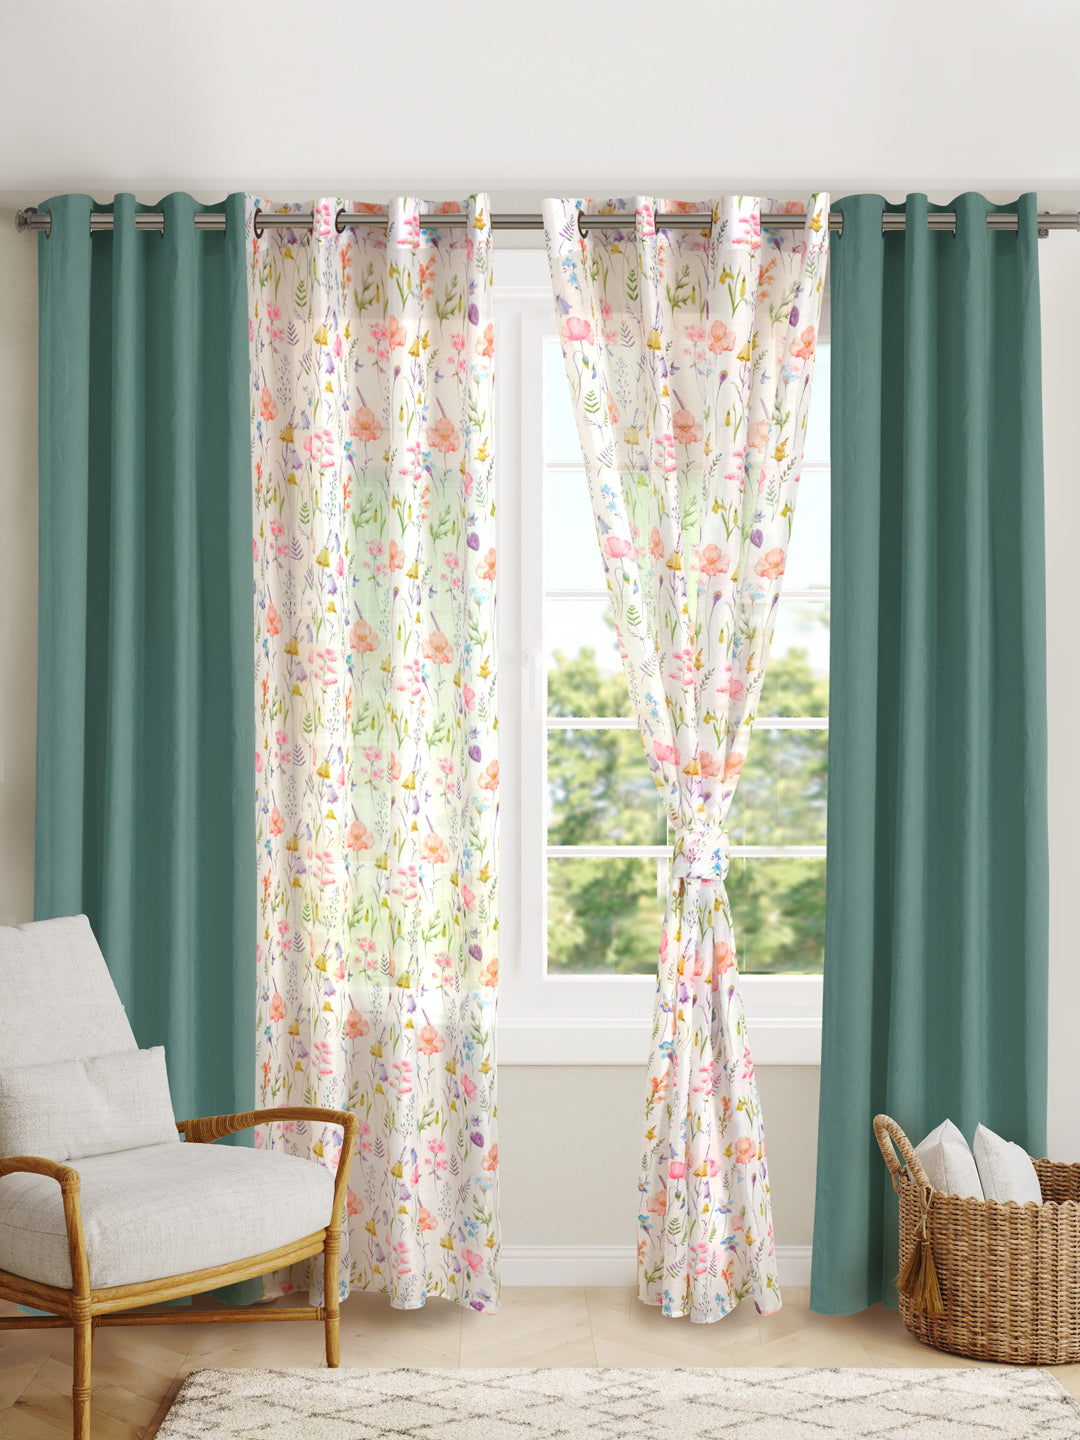 Blanc9 Set Of 4 Floral Garden Printed With Green Plain 7Ft. Curtain